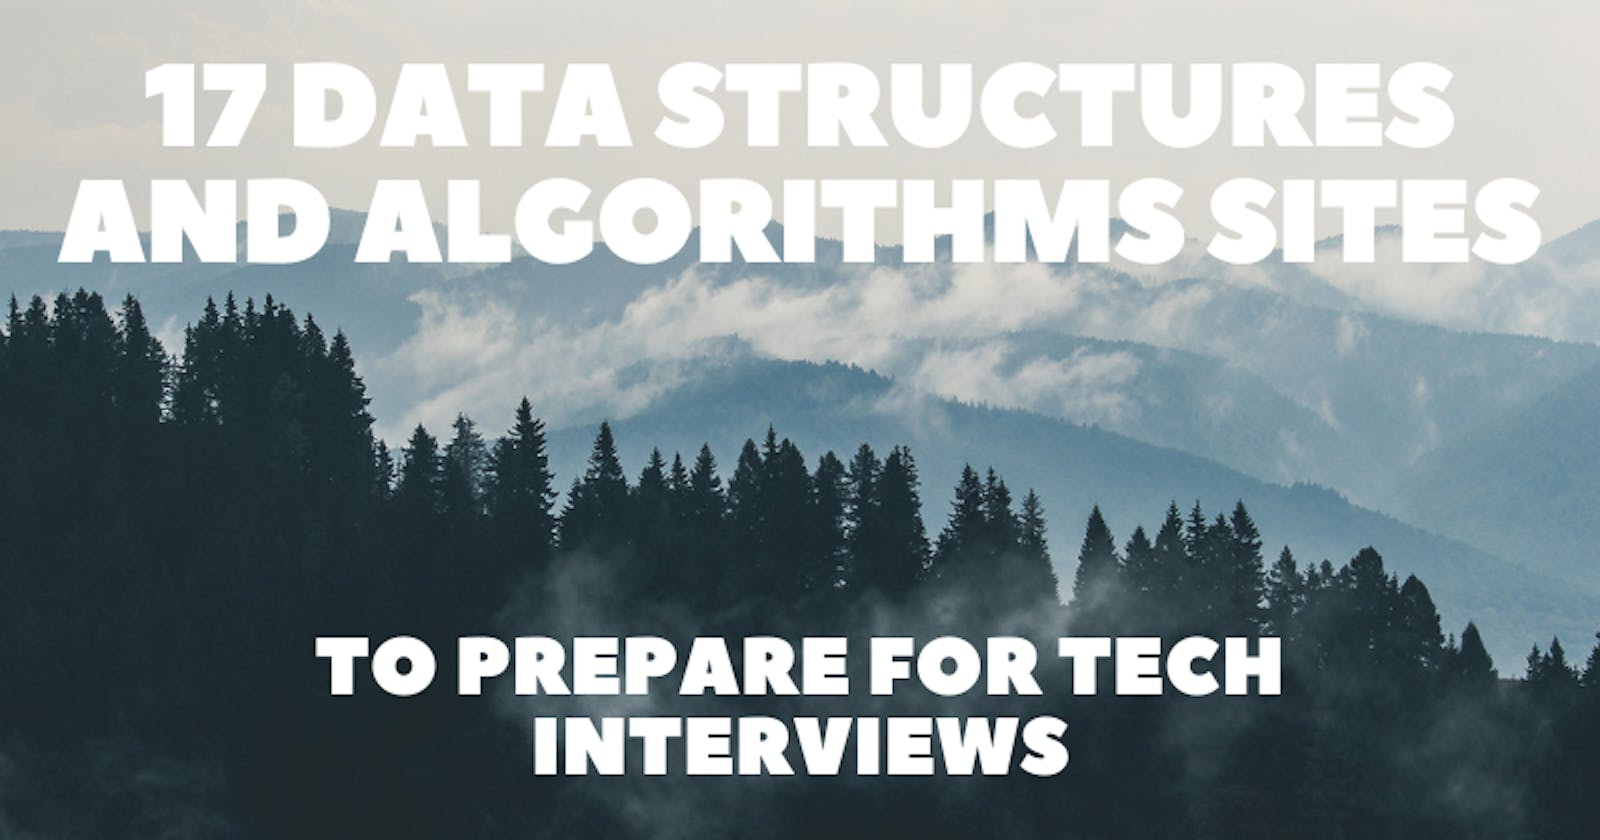 17 Data Structures and Algorithms Sites to Prepare for Tech Interviews  👨‍💻👩‍💻